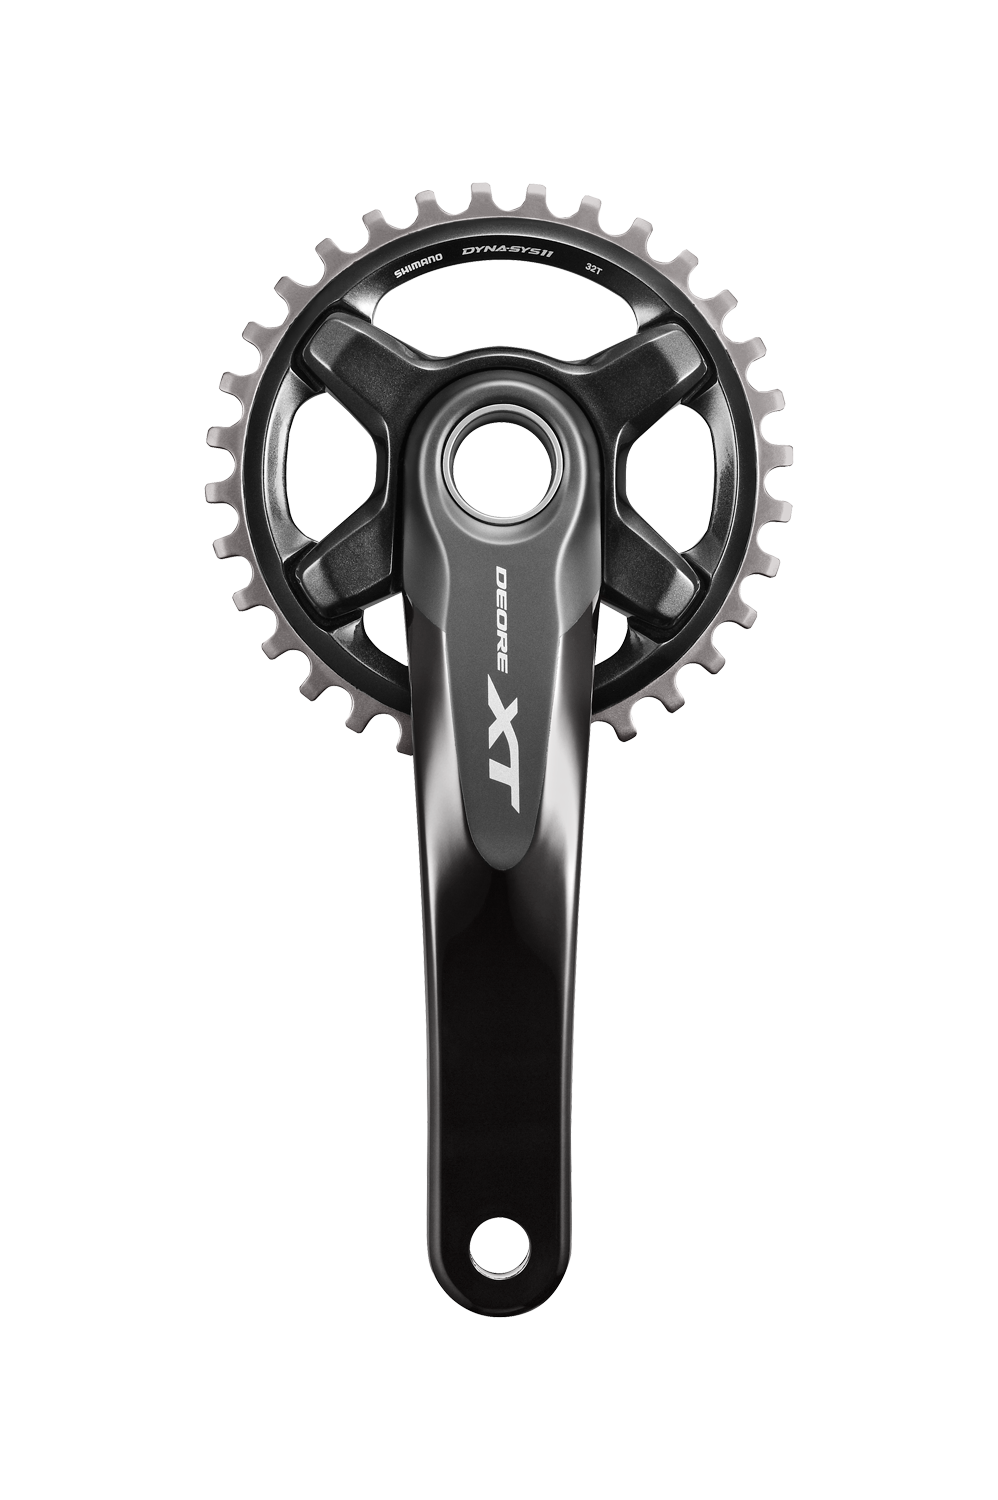 Shimano updates Deore XT group, its version of Boost | Bicycle Retailer and Industry News